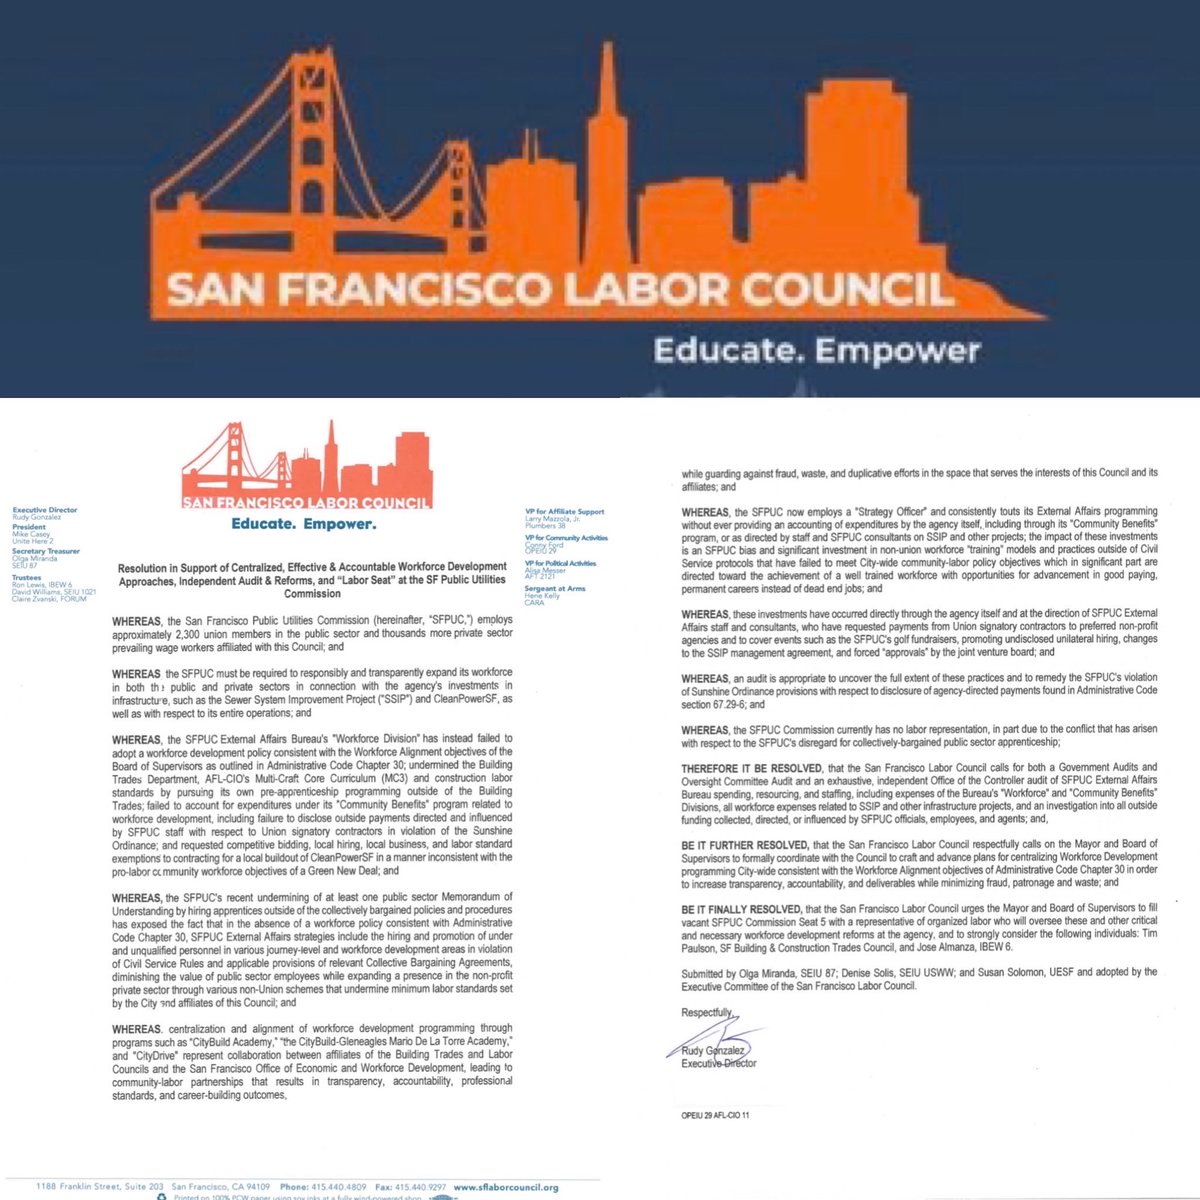 Happy Valentine’s Day ❤️ to our siblings in #SFLabor #OlgaMiranda #SueSolomon #TheresaSolis for this impactful V-Day❤️ Resolution in 2019 that spelled out clearly the “labor” issues & concerns @mysfpuc we’ve focused on since 2015! It lead to the 1st audit of #CBSecrets💦